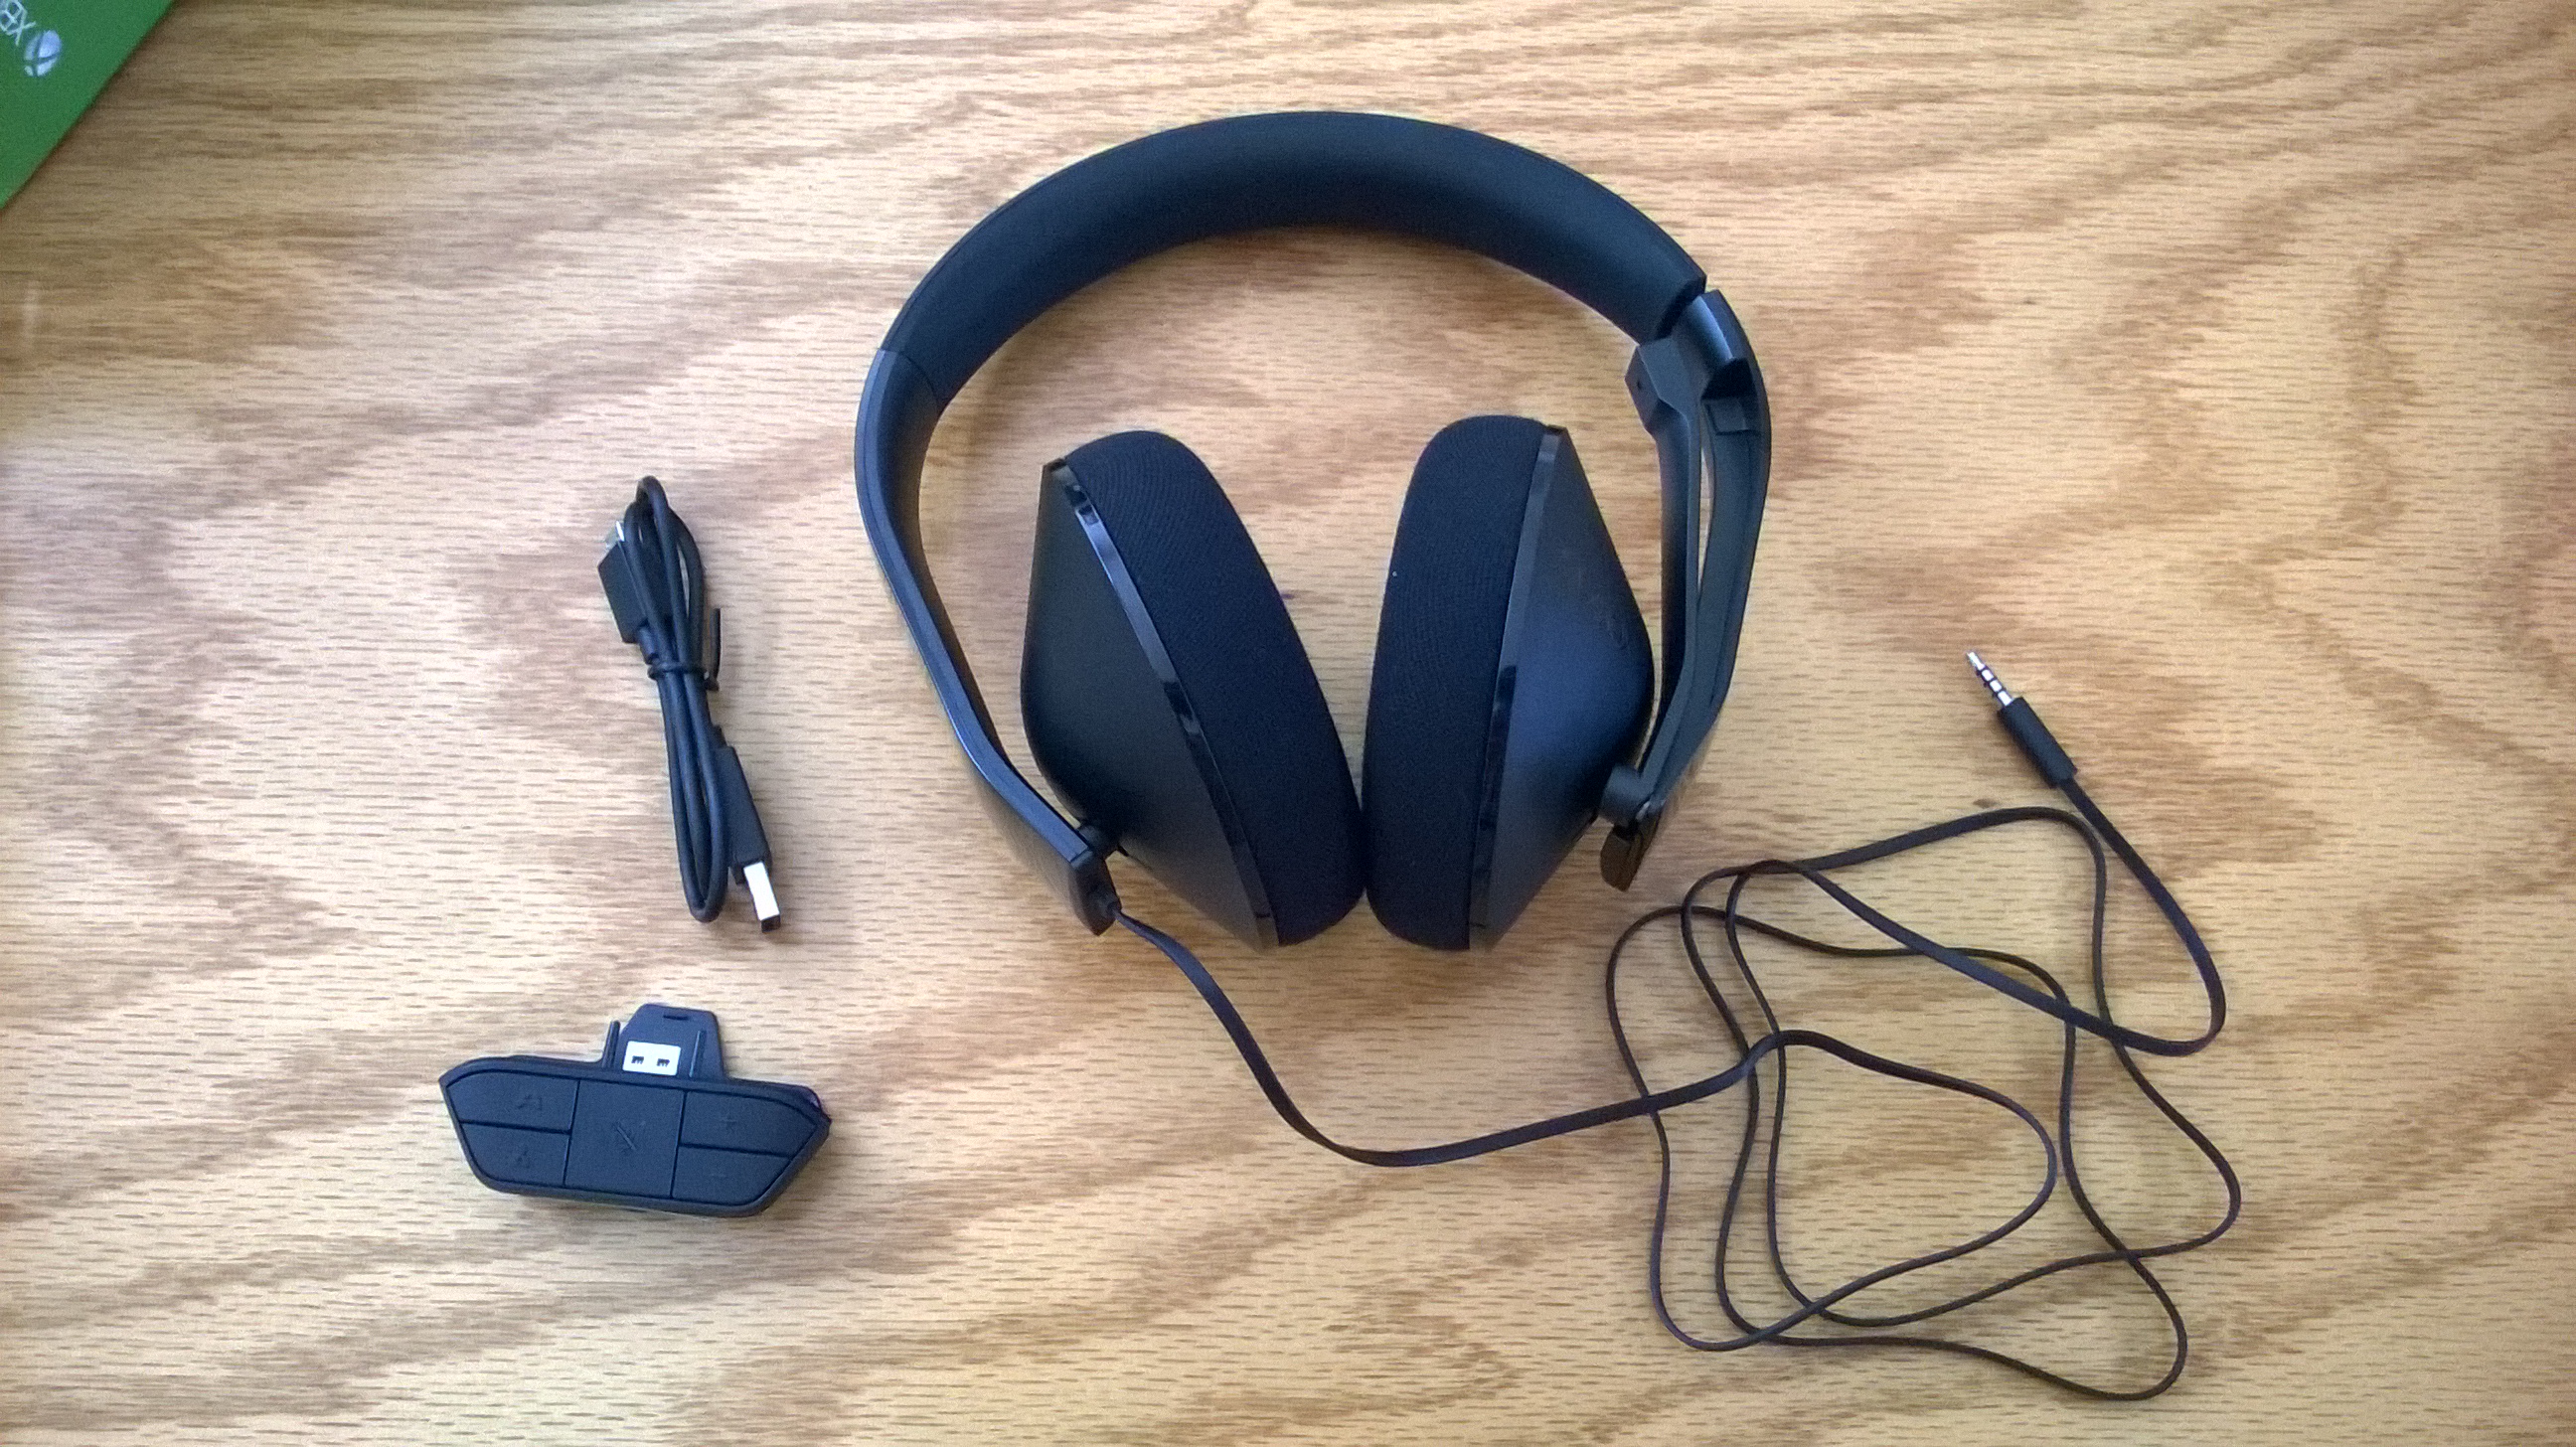 microsoft xbox one stereo headset details